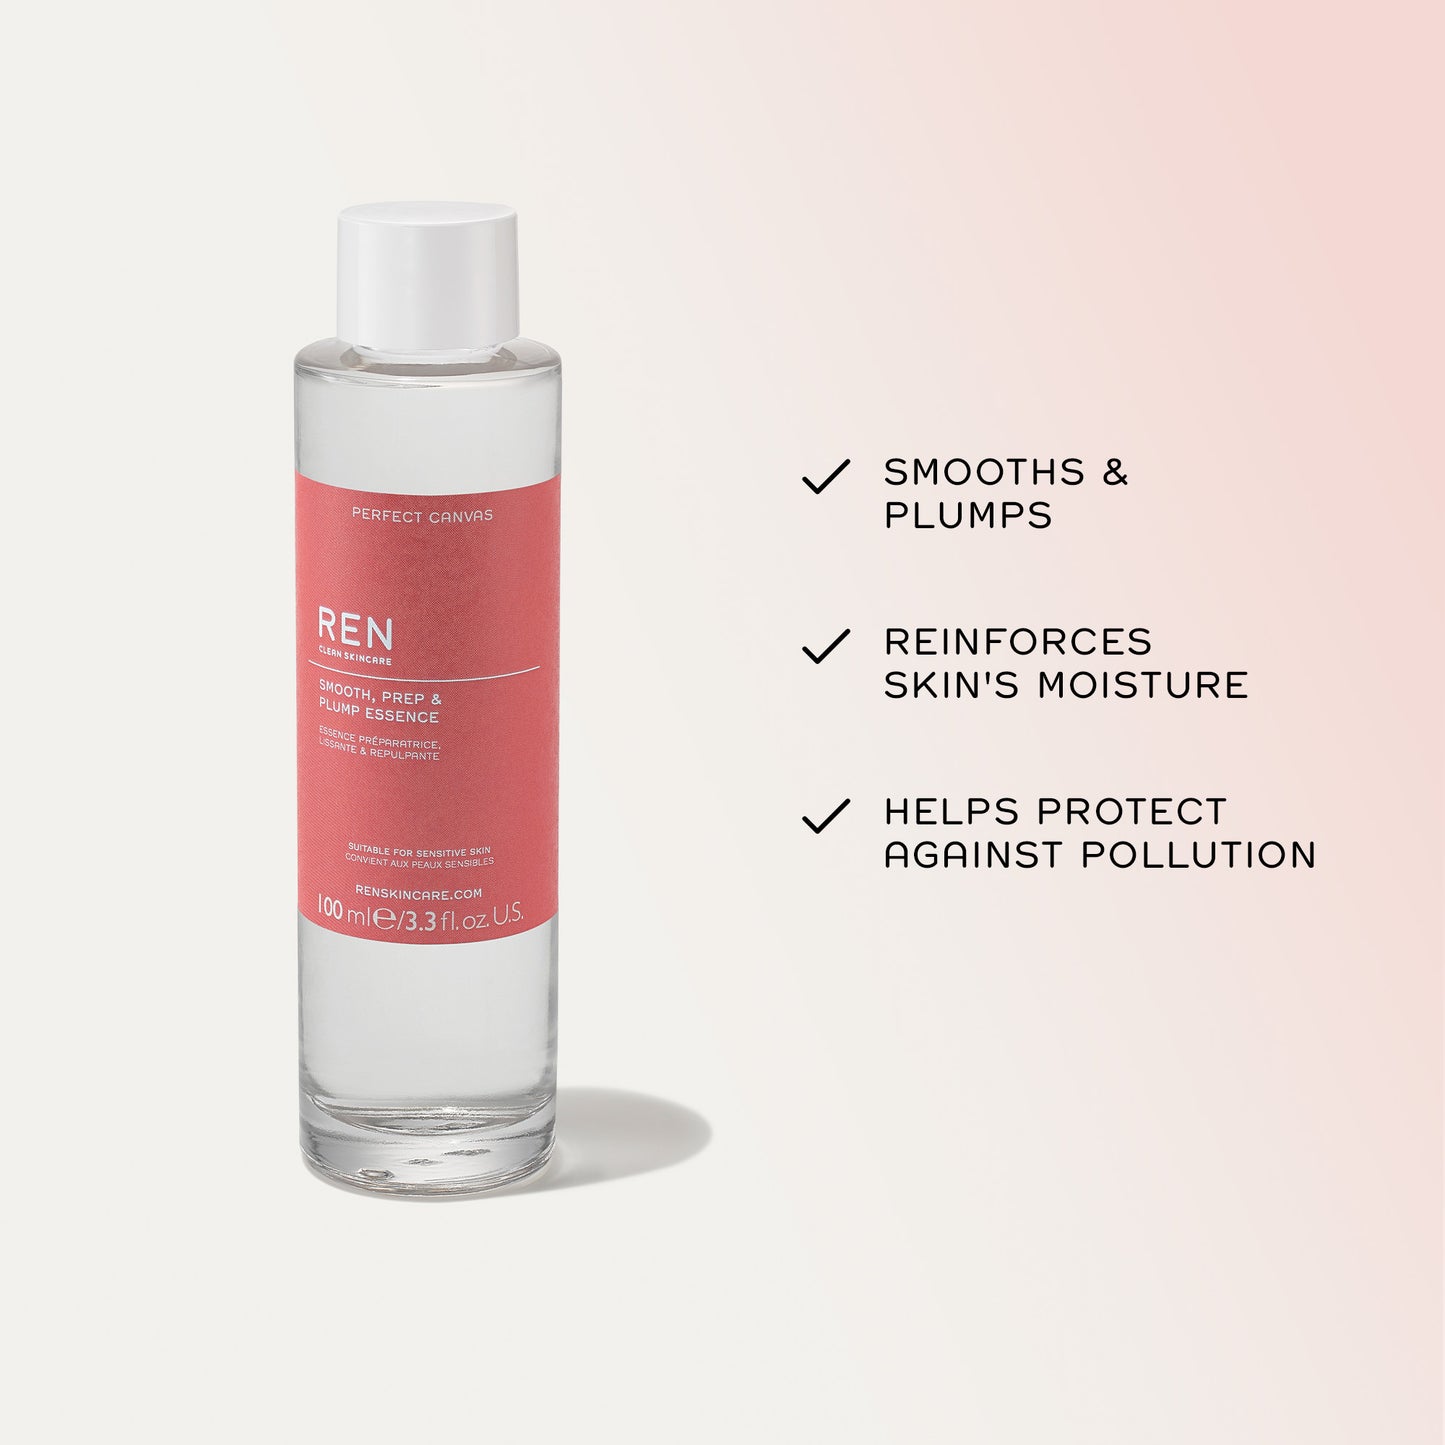 REN Perfect Canvas Smooth, Prep & Plump Essence | smooth and plump the skin  | skin moisture primer | pollution in skin